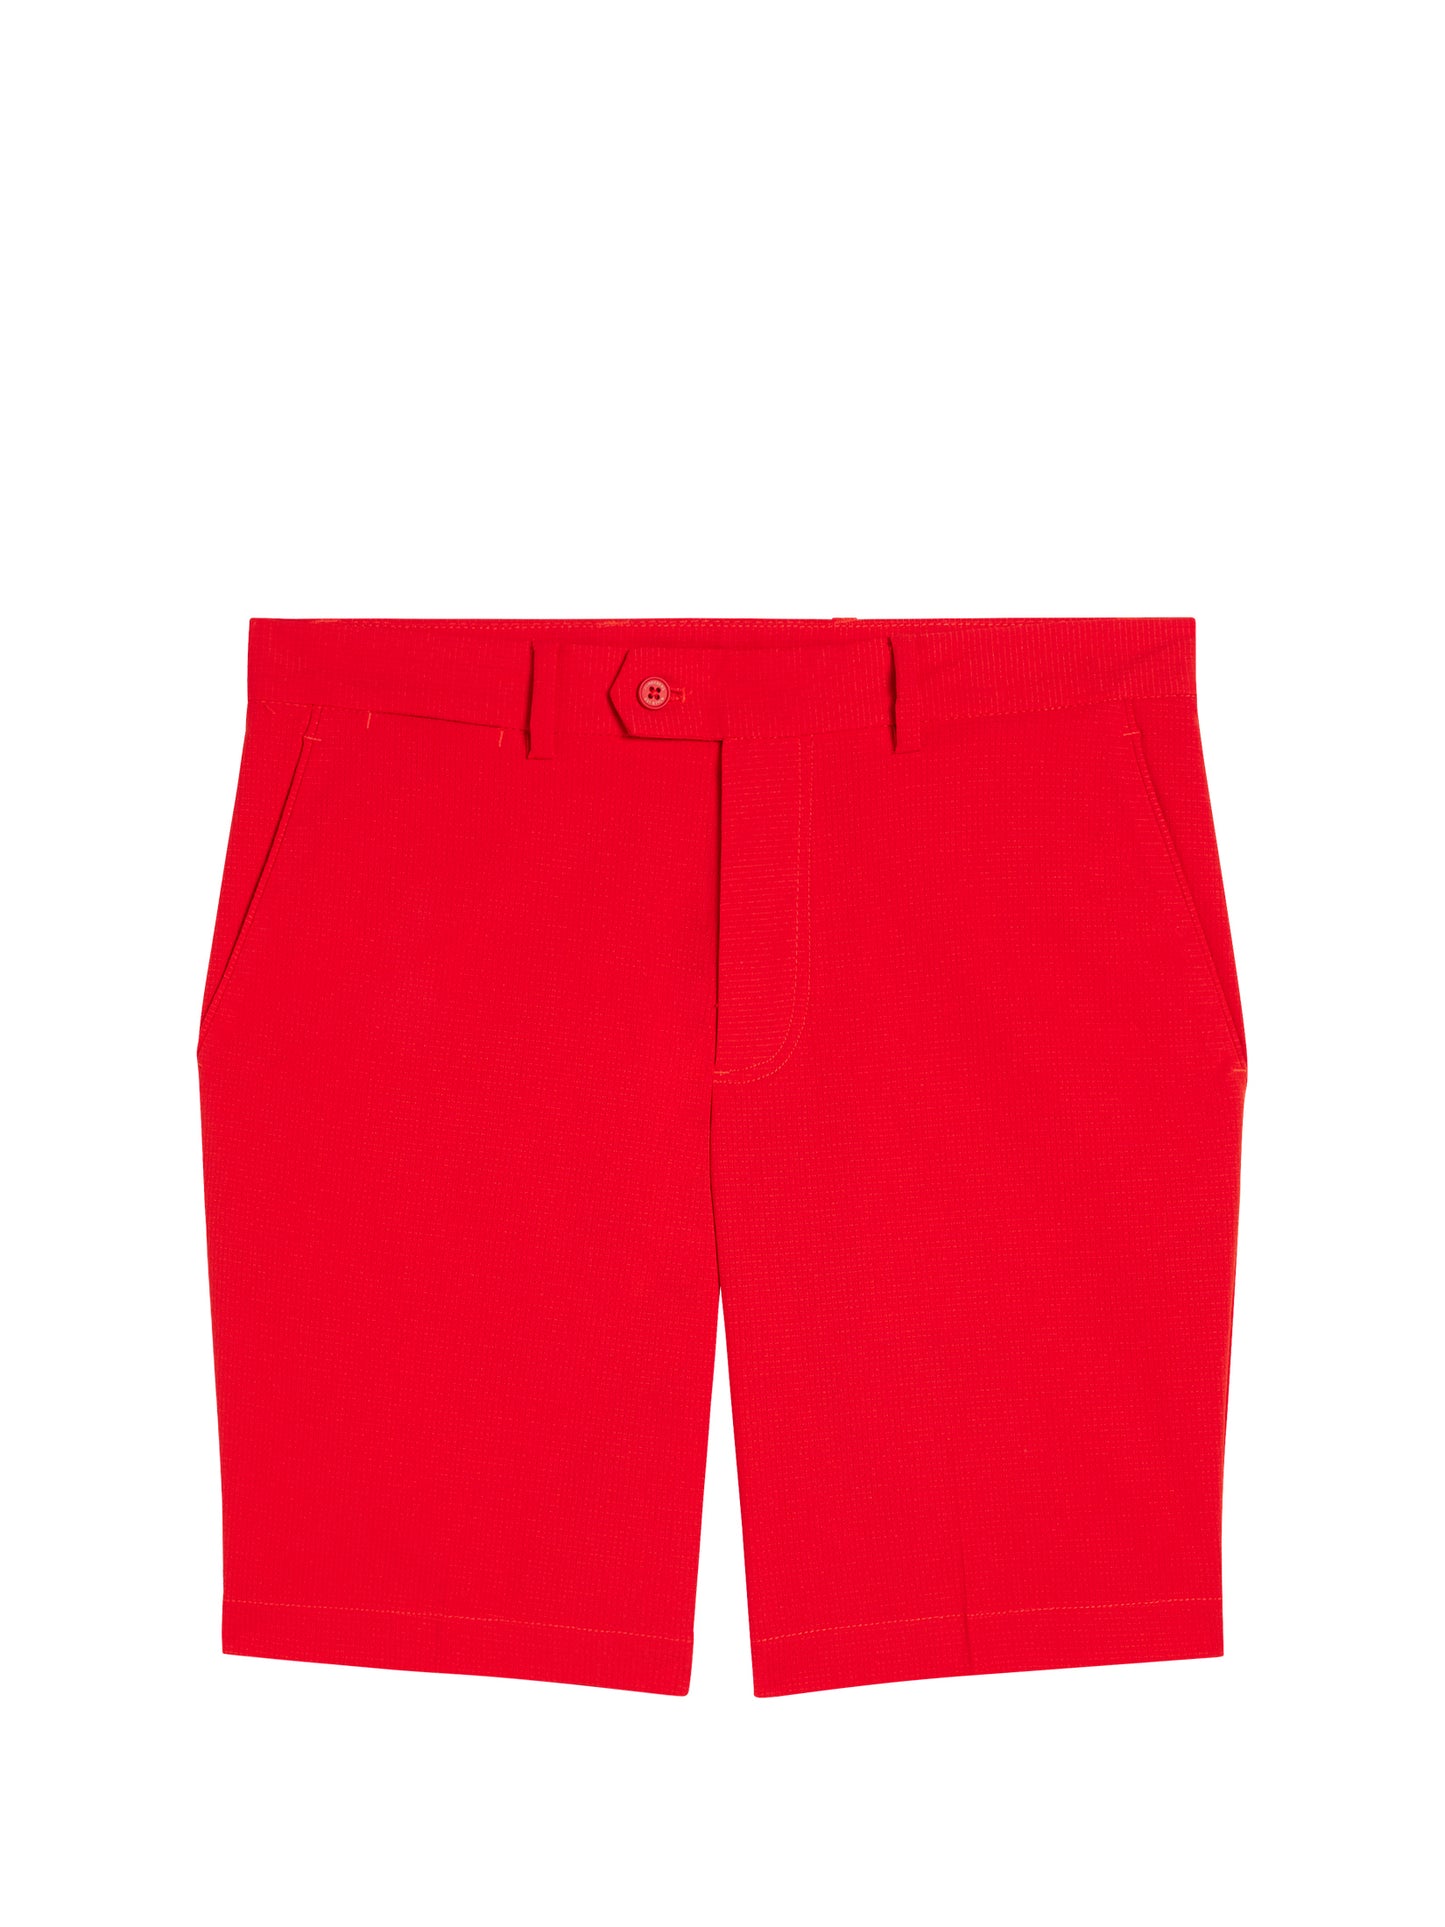 Vent Tight Shorts / Fiery Red